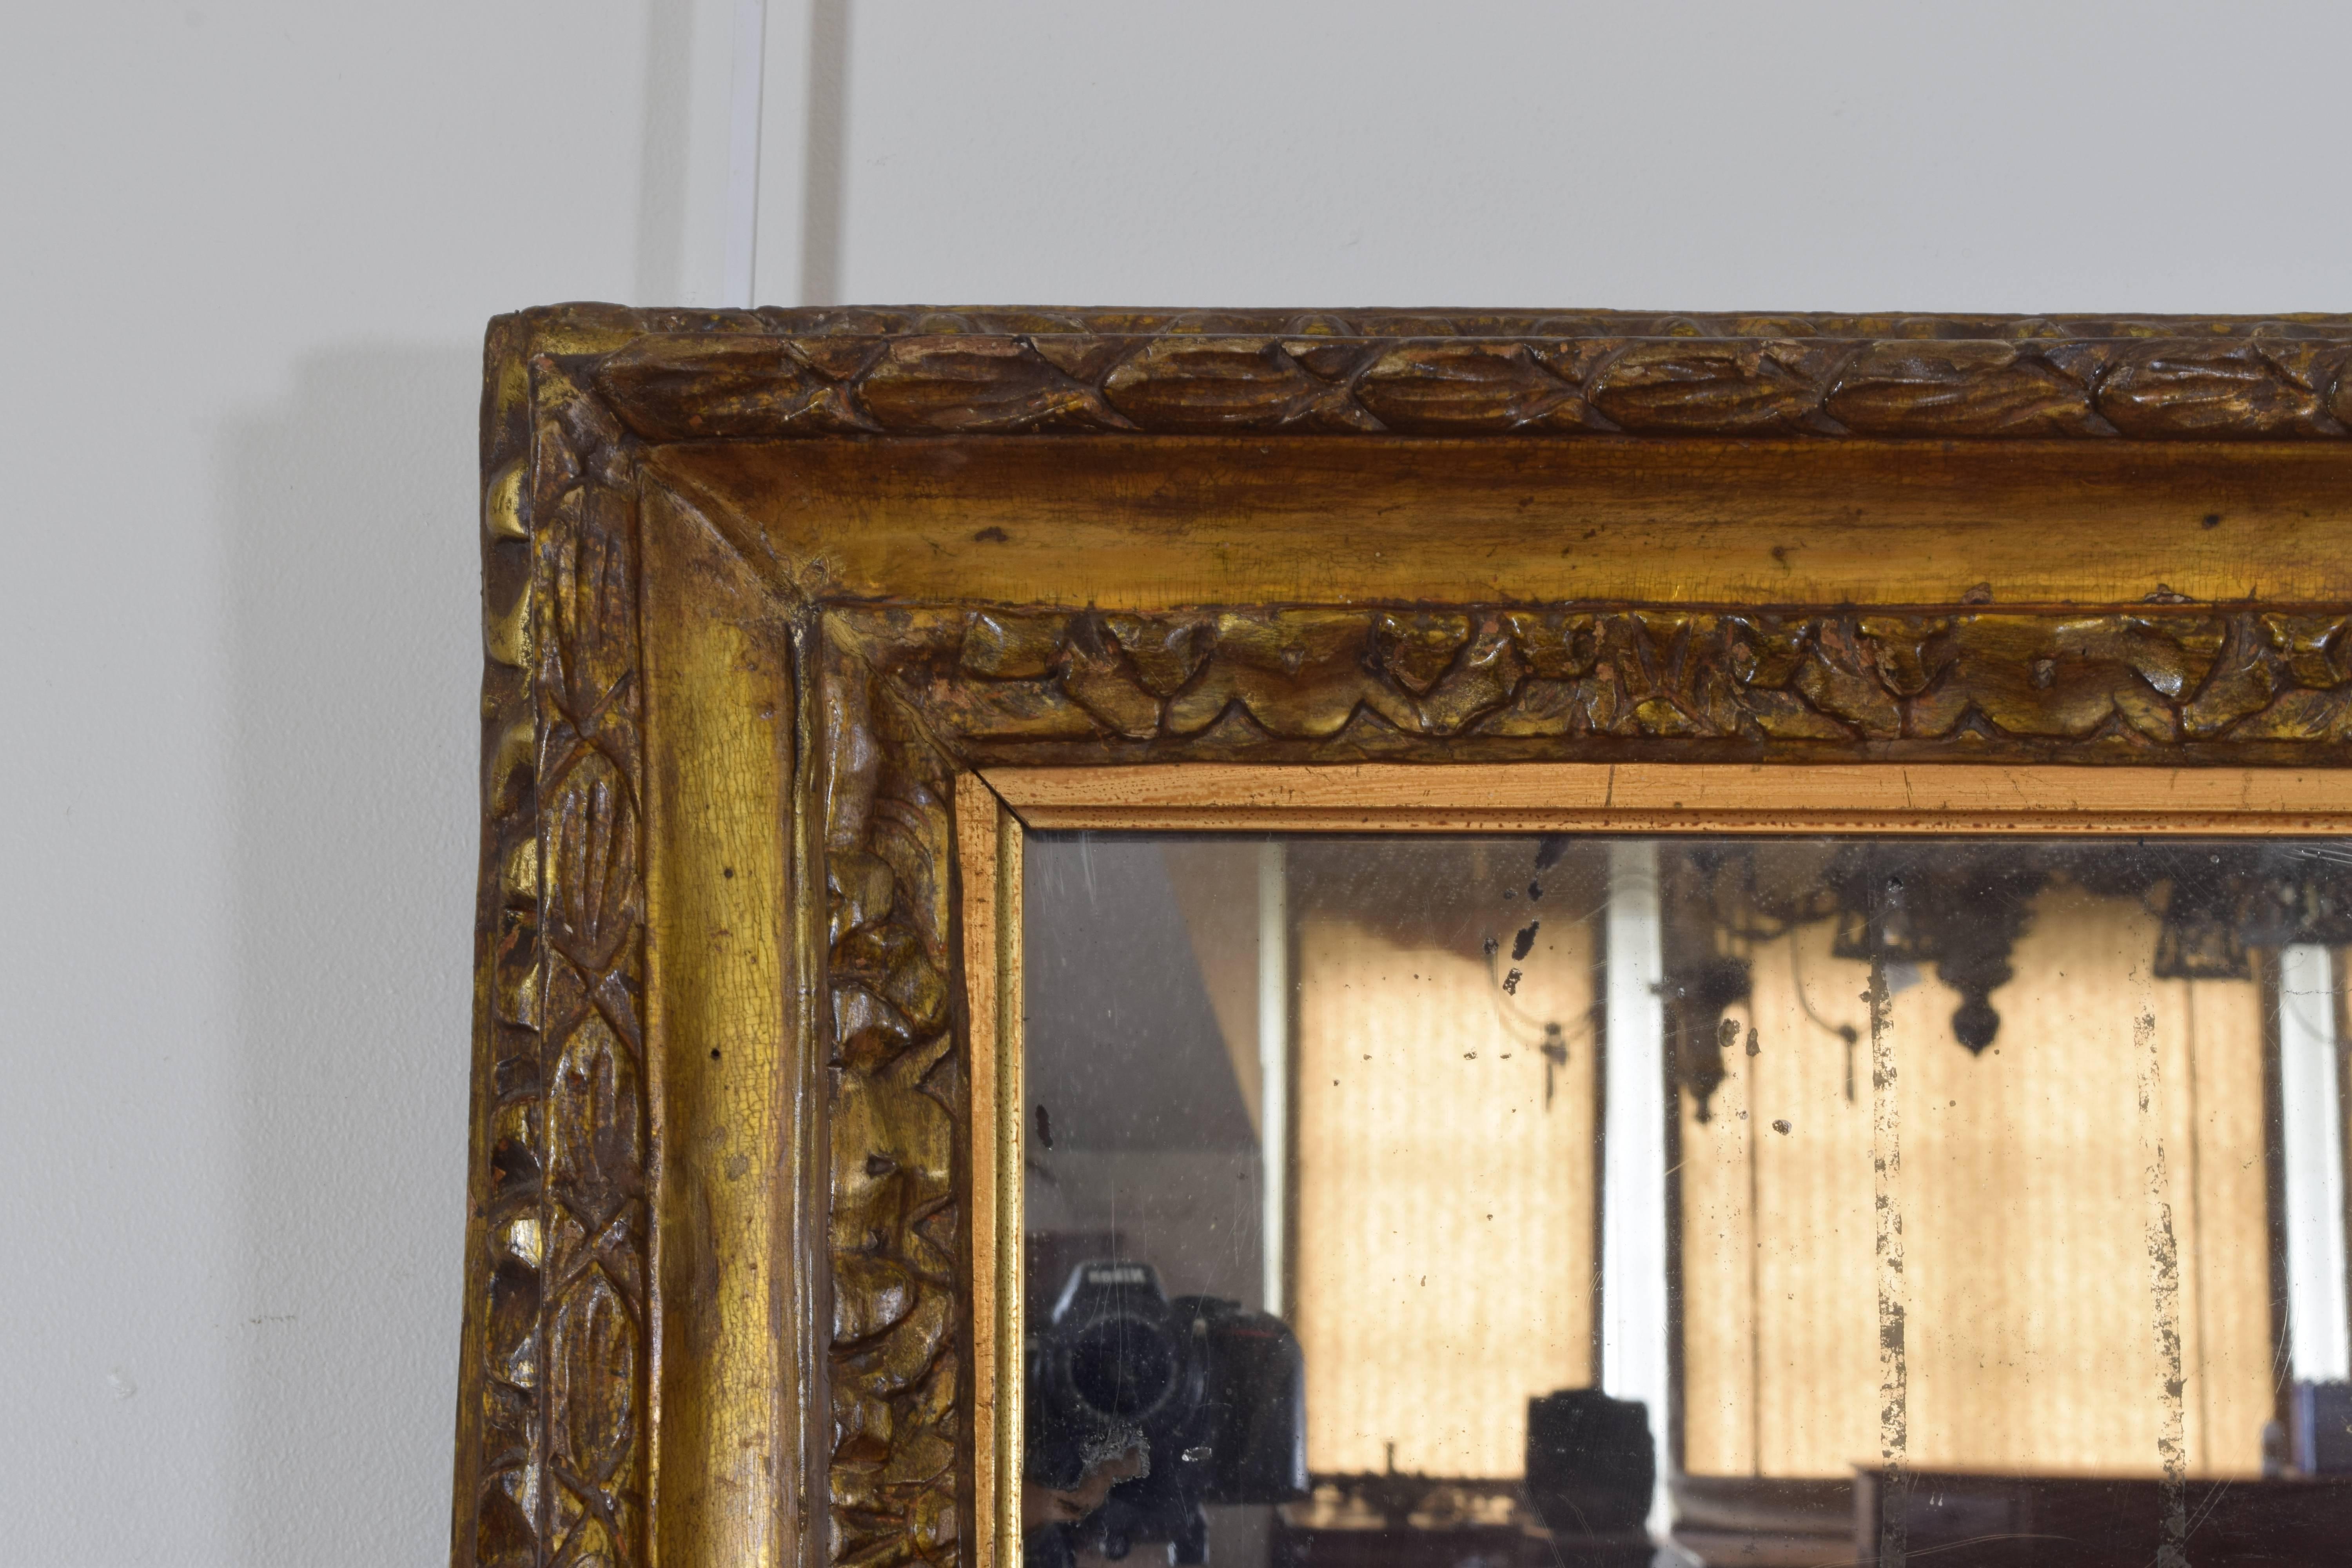 Italian, Piemontese, Carved Giltwood Mirror, Early 18th Century 1